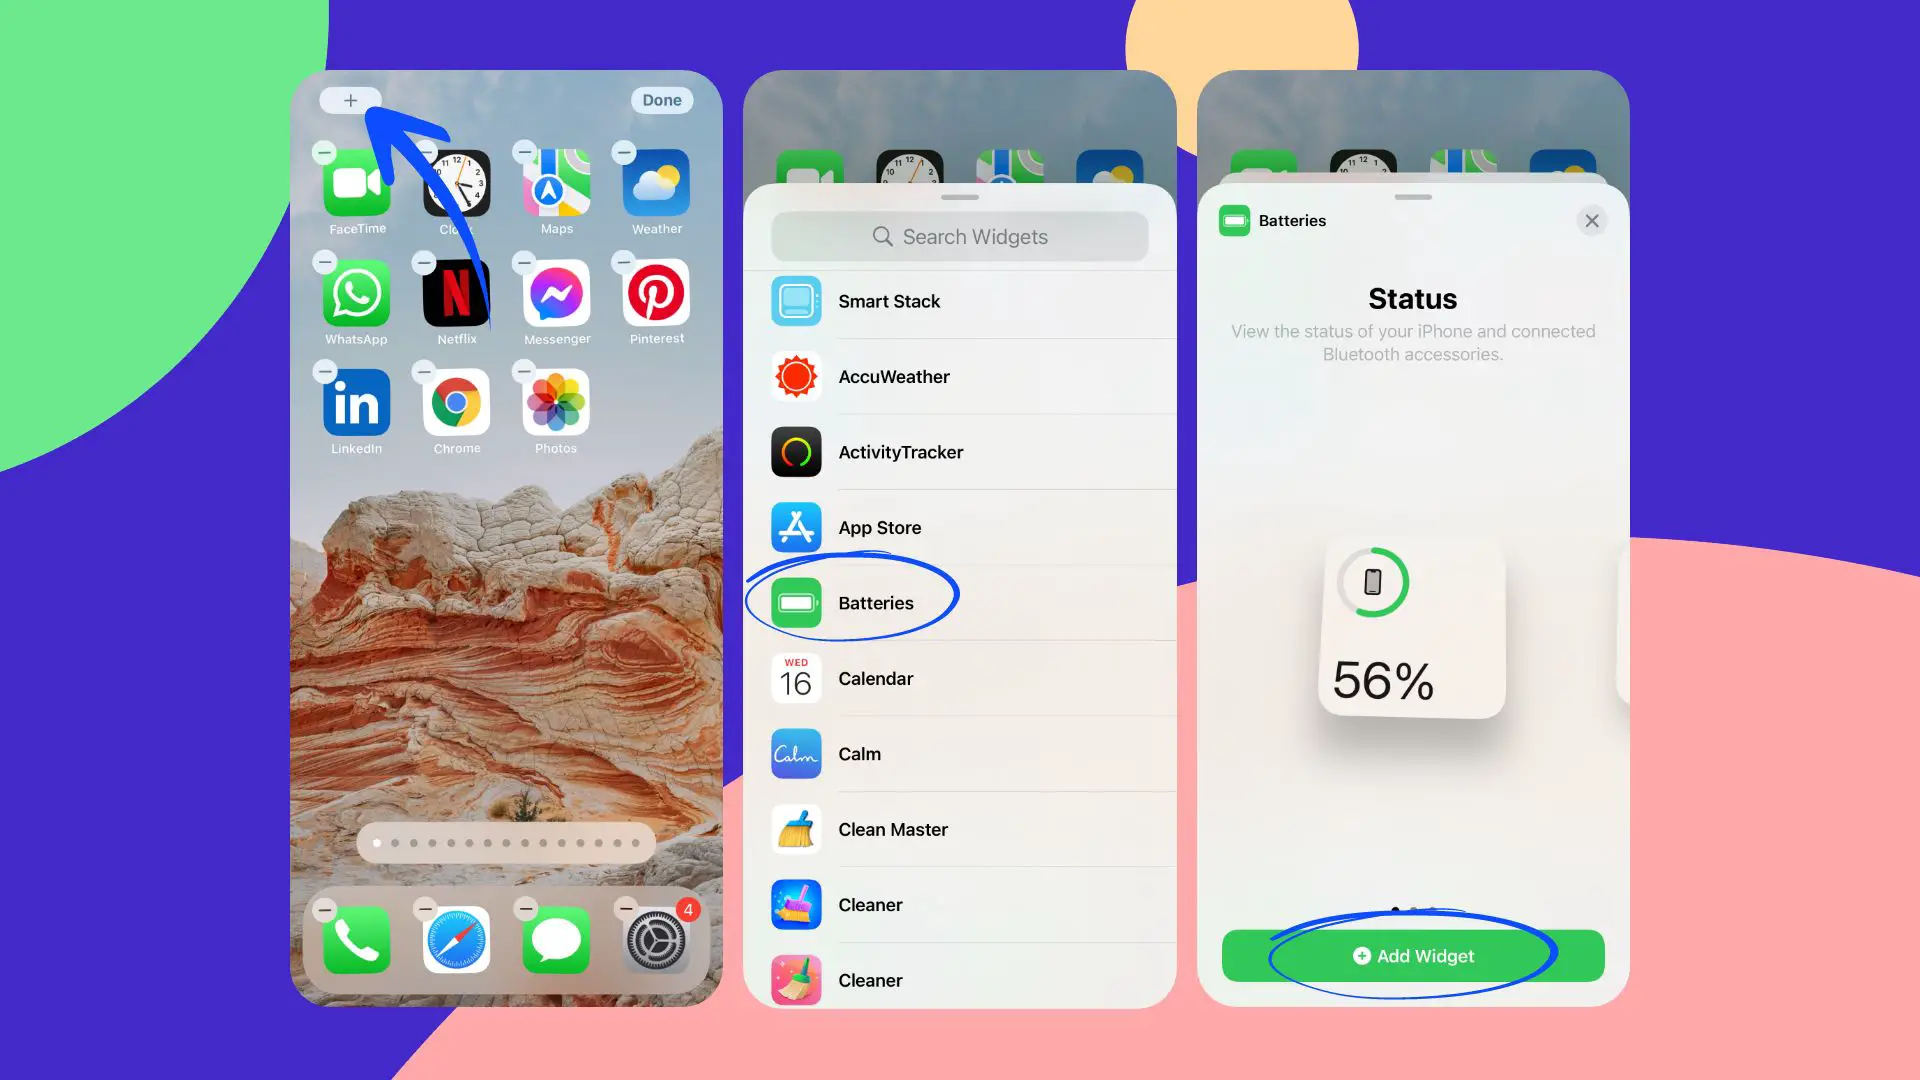 Addition of Battery Widget on your iPhone